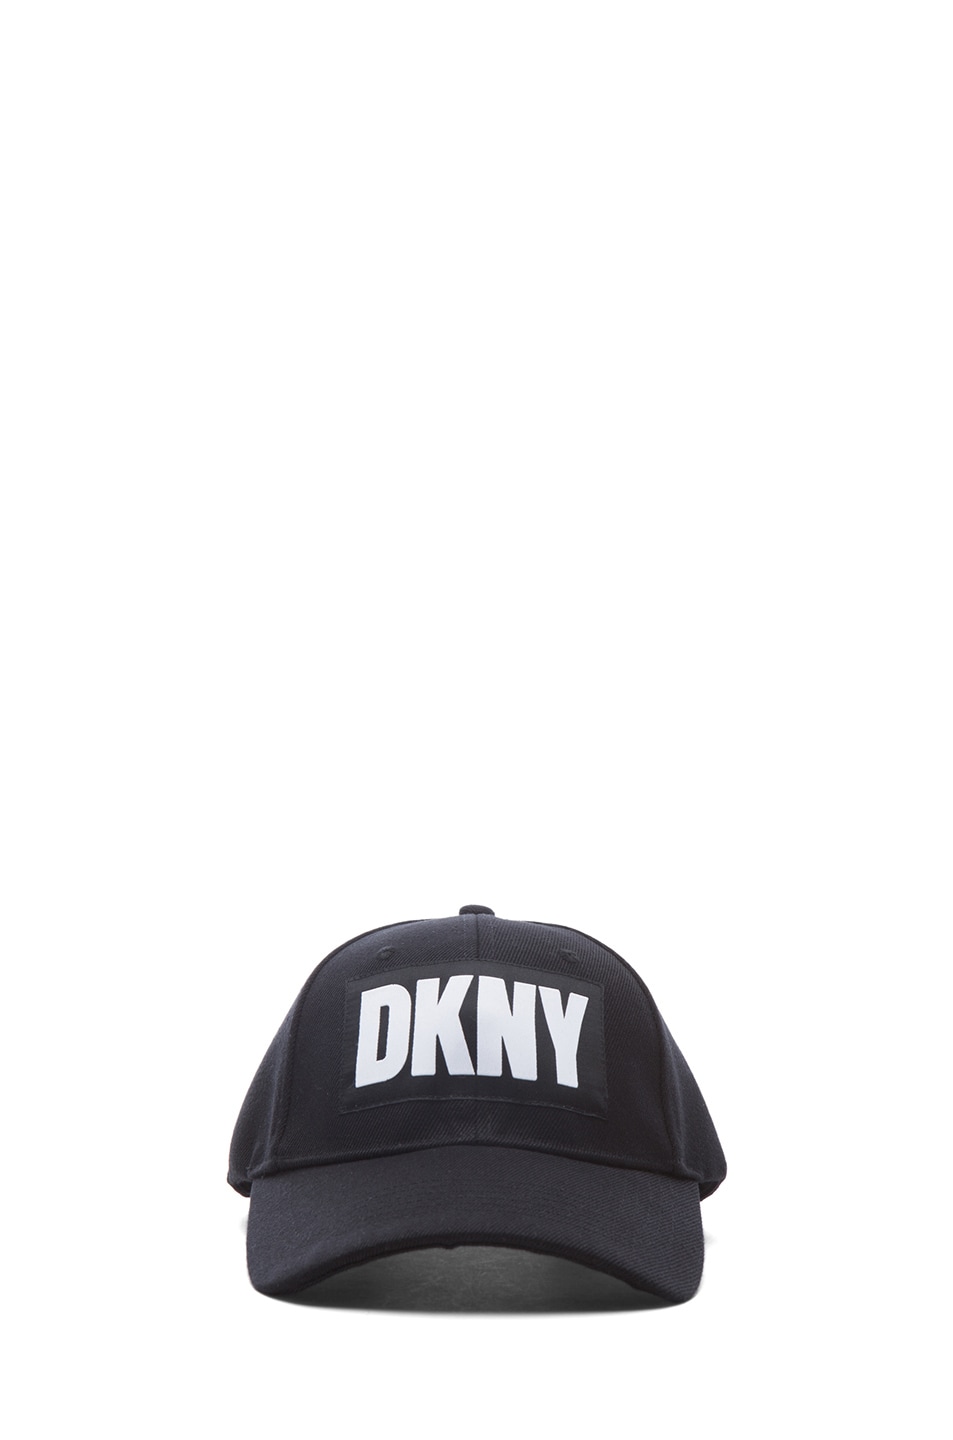 Image 1 of Opening Ceremony x DKNY Poly Baseball Hat in Black